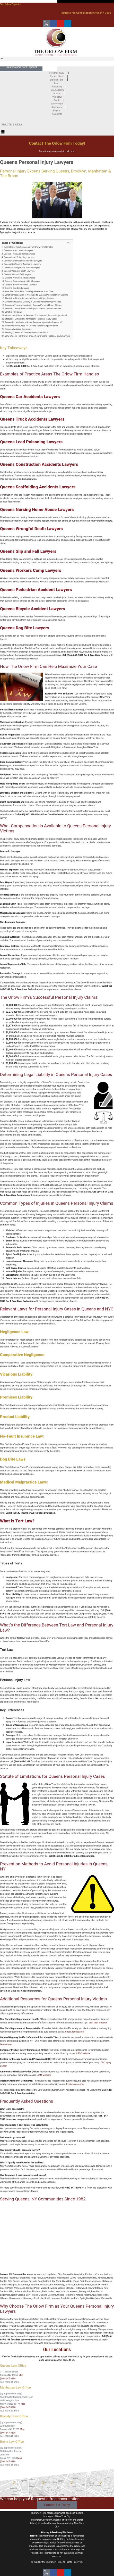 The Orlow Firm - Queens NY Lawyers